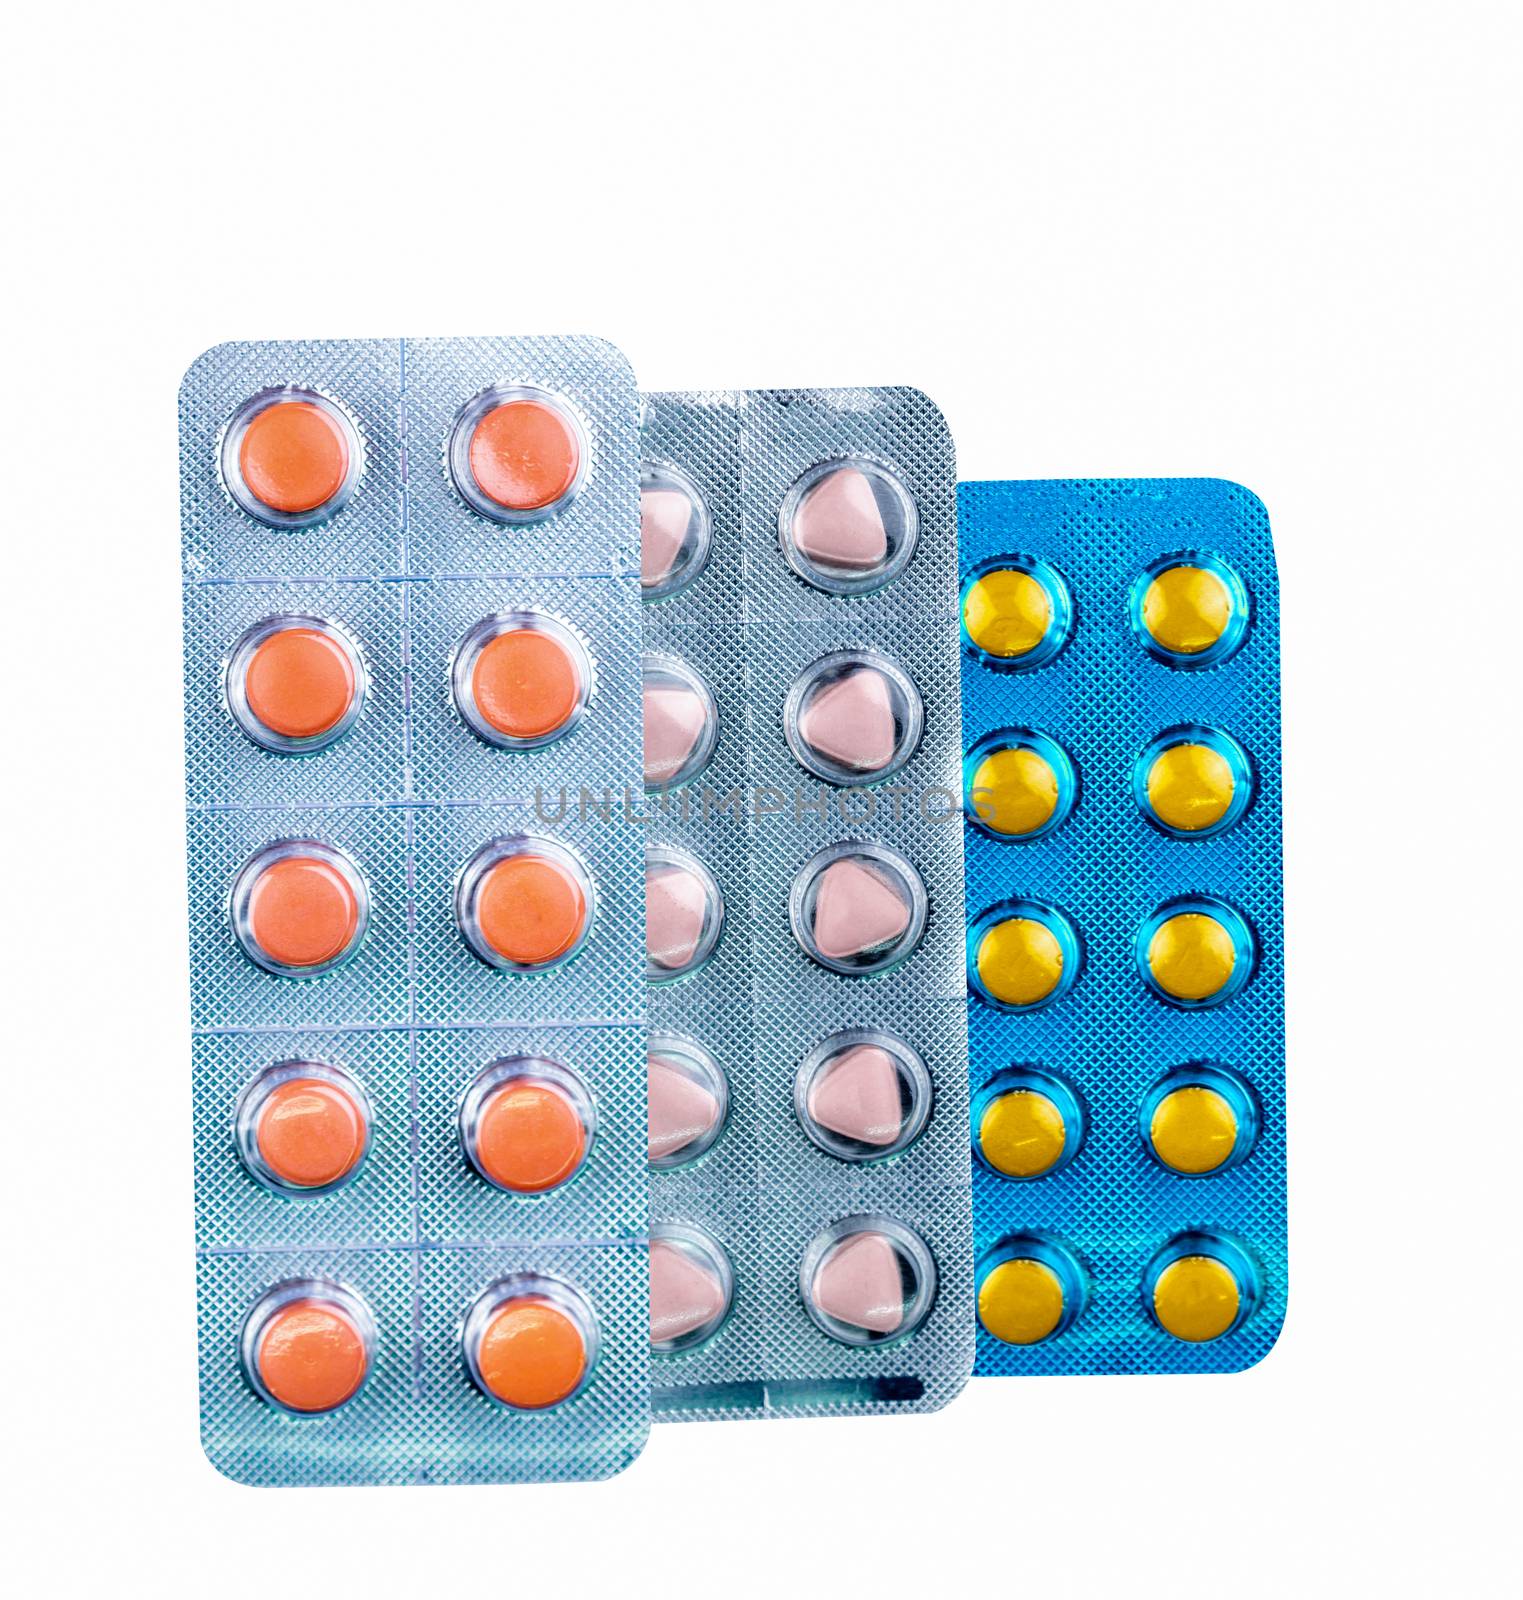 Diclofenac in blister pack isolated on white background. Drug with round and triangle shaped in pack. Film coated tablets. Orange, yellow, and pale pink tablets pills. Painkiller medicine. Pharmacy.